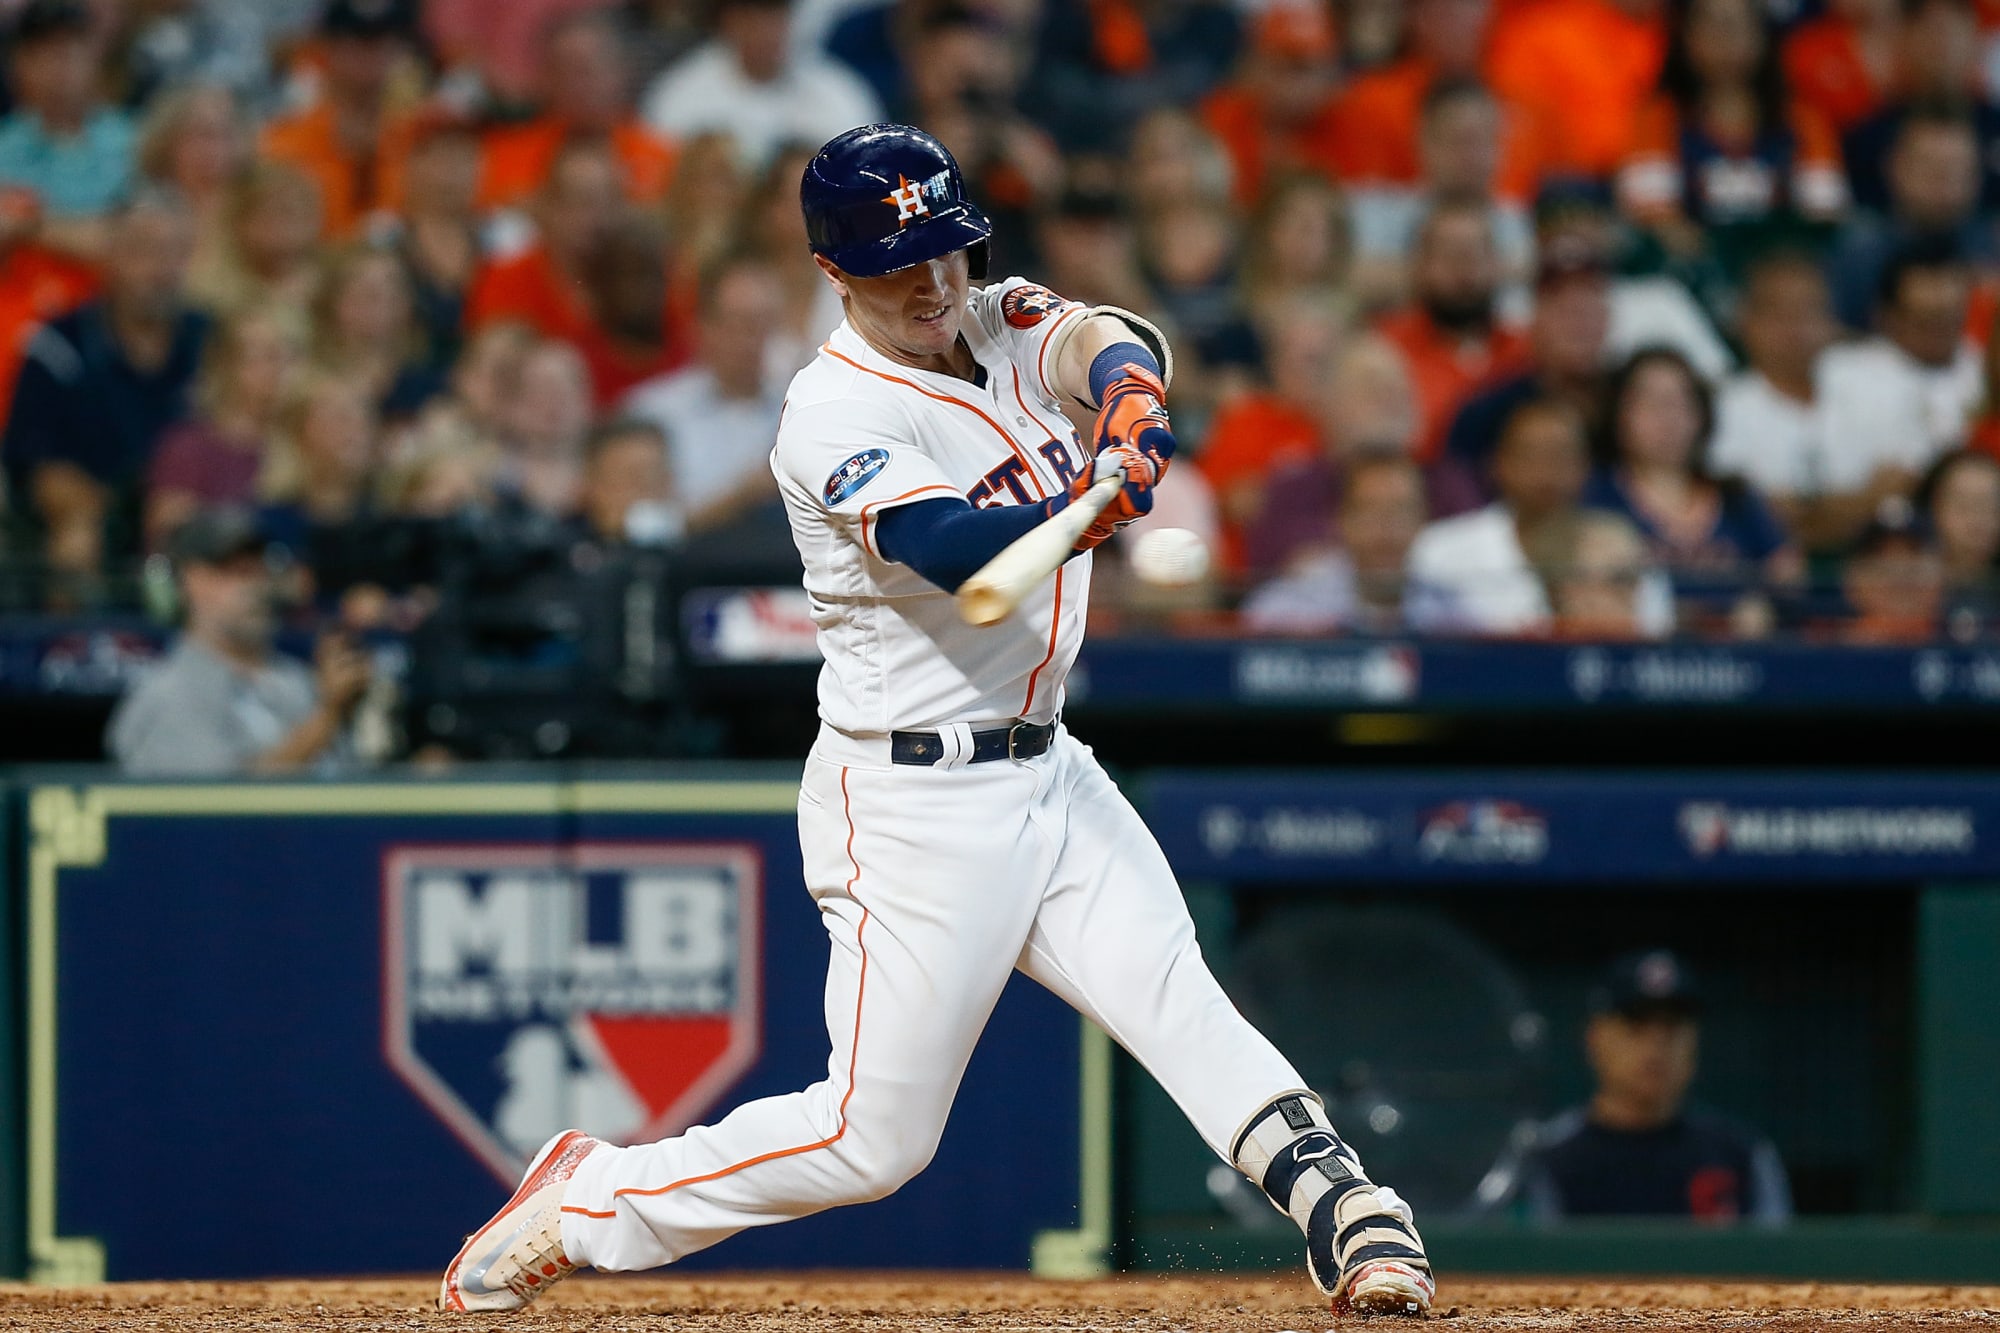 Houston Astros: Bregman's recovery from surgery will strengthen team